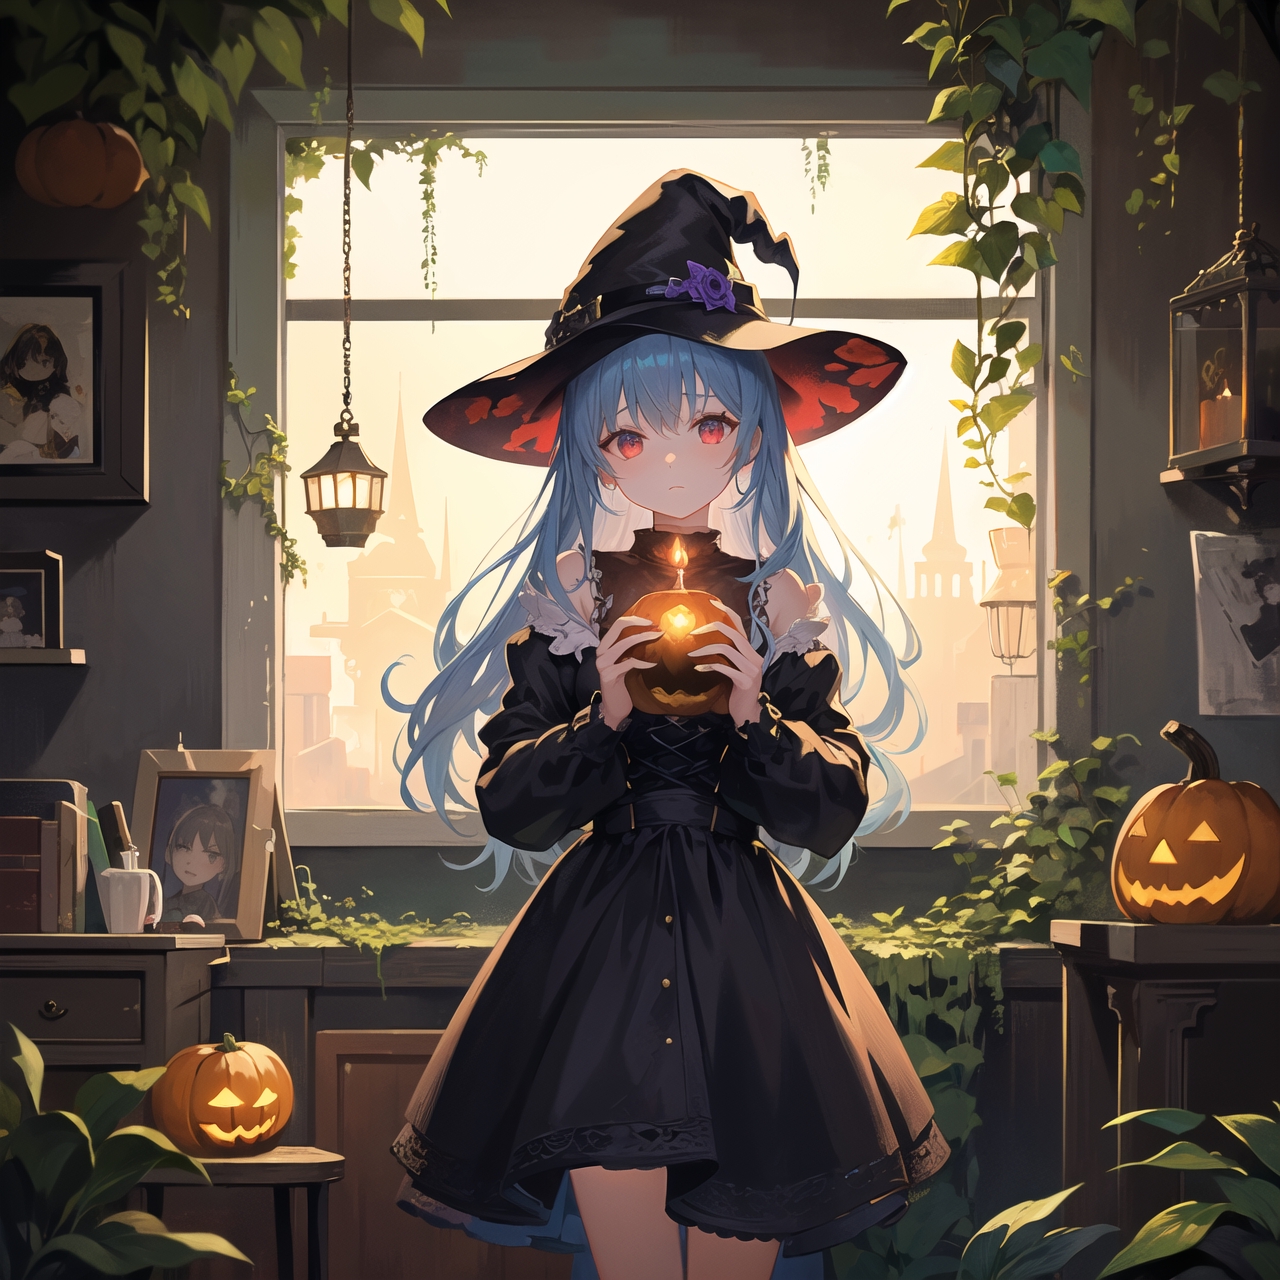 HD wallpaper: anime girl, halloween costume, witch, broom, dress, smiling |  Wallpaper Flare